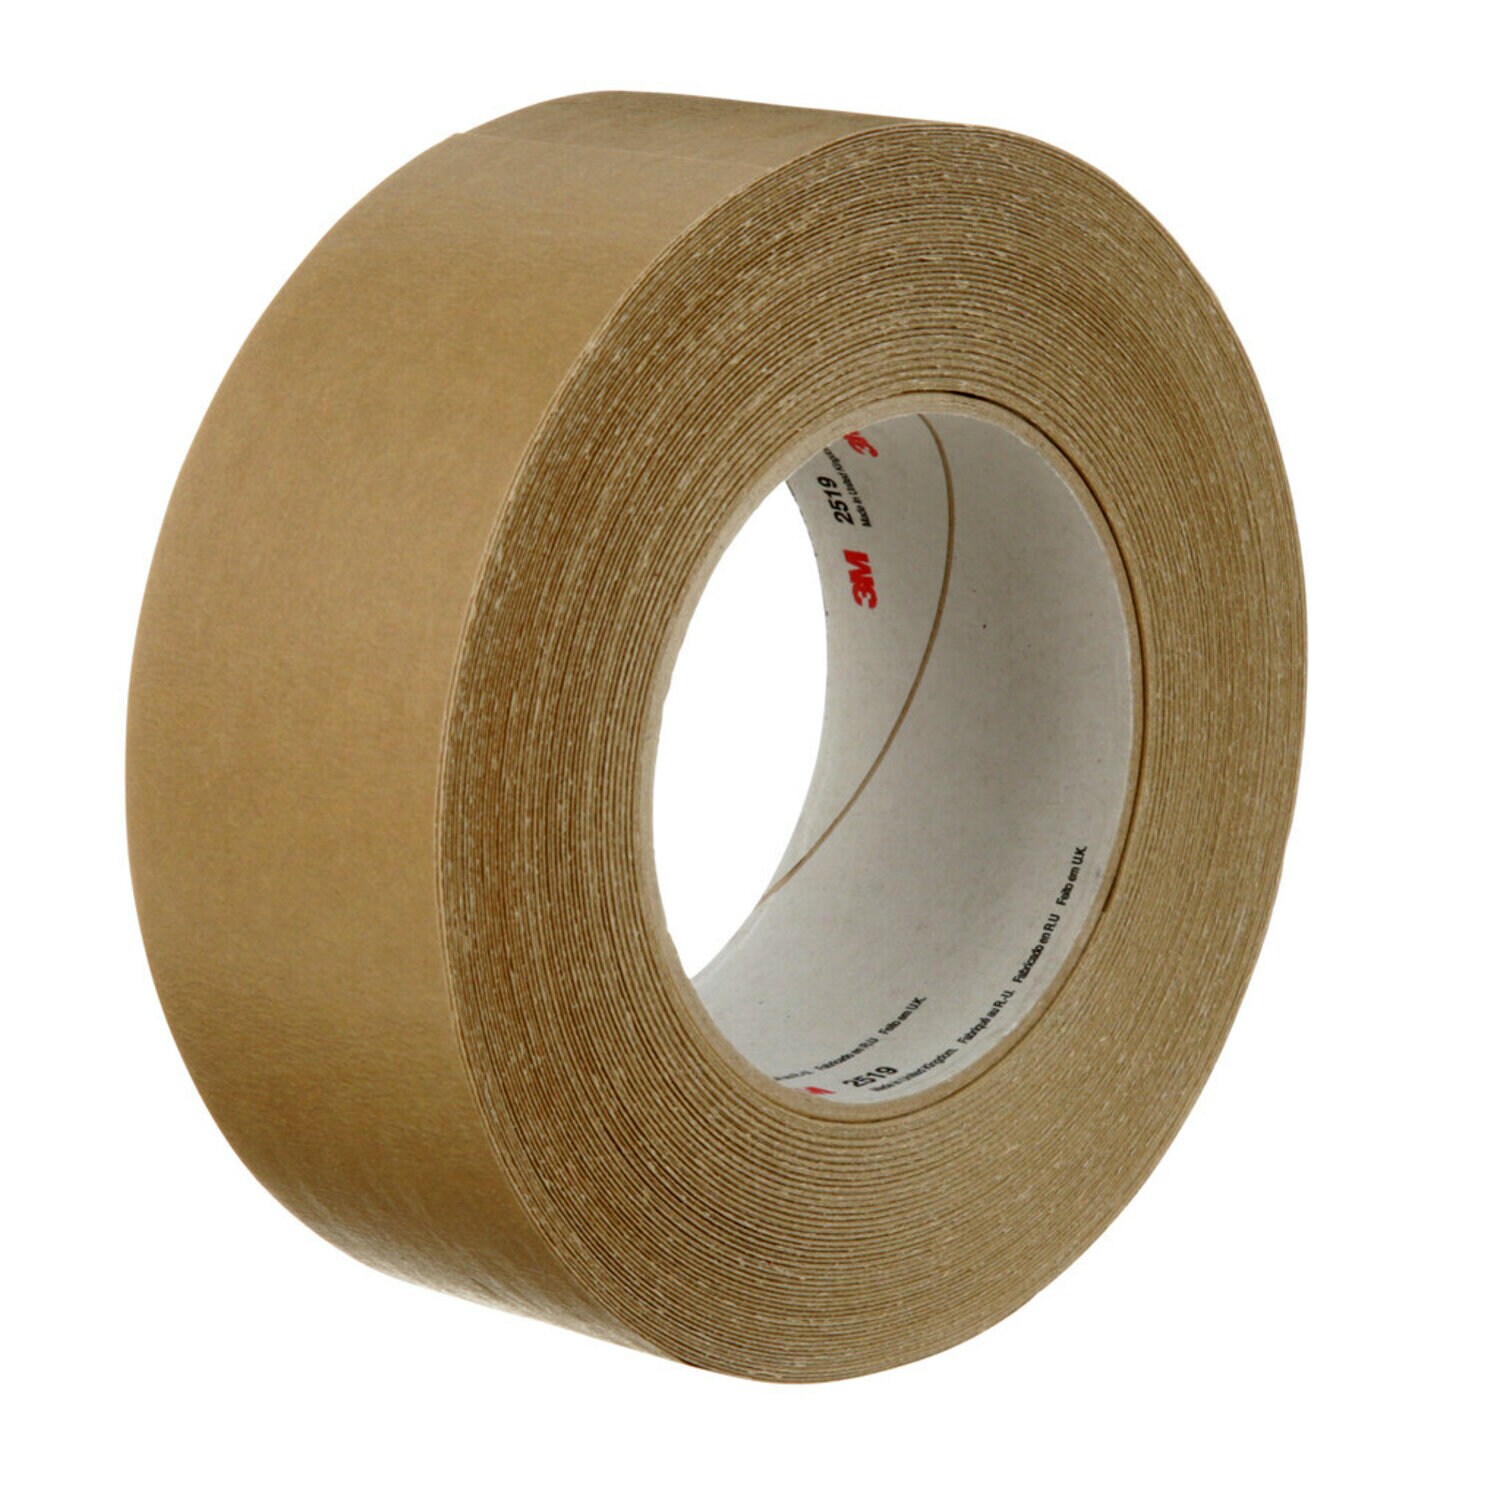 Save on 3M Scotch Mounting Tape Heavy Duty 0.5 X 75 Inch Order